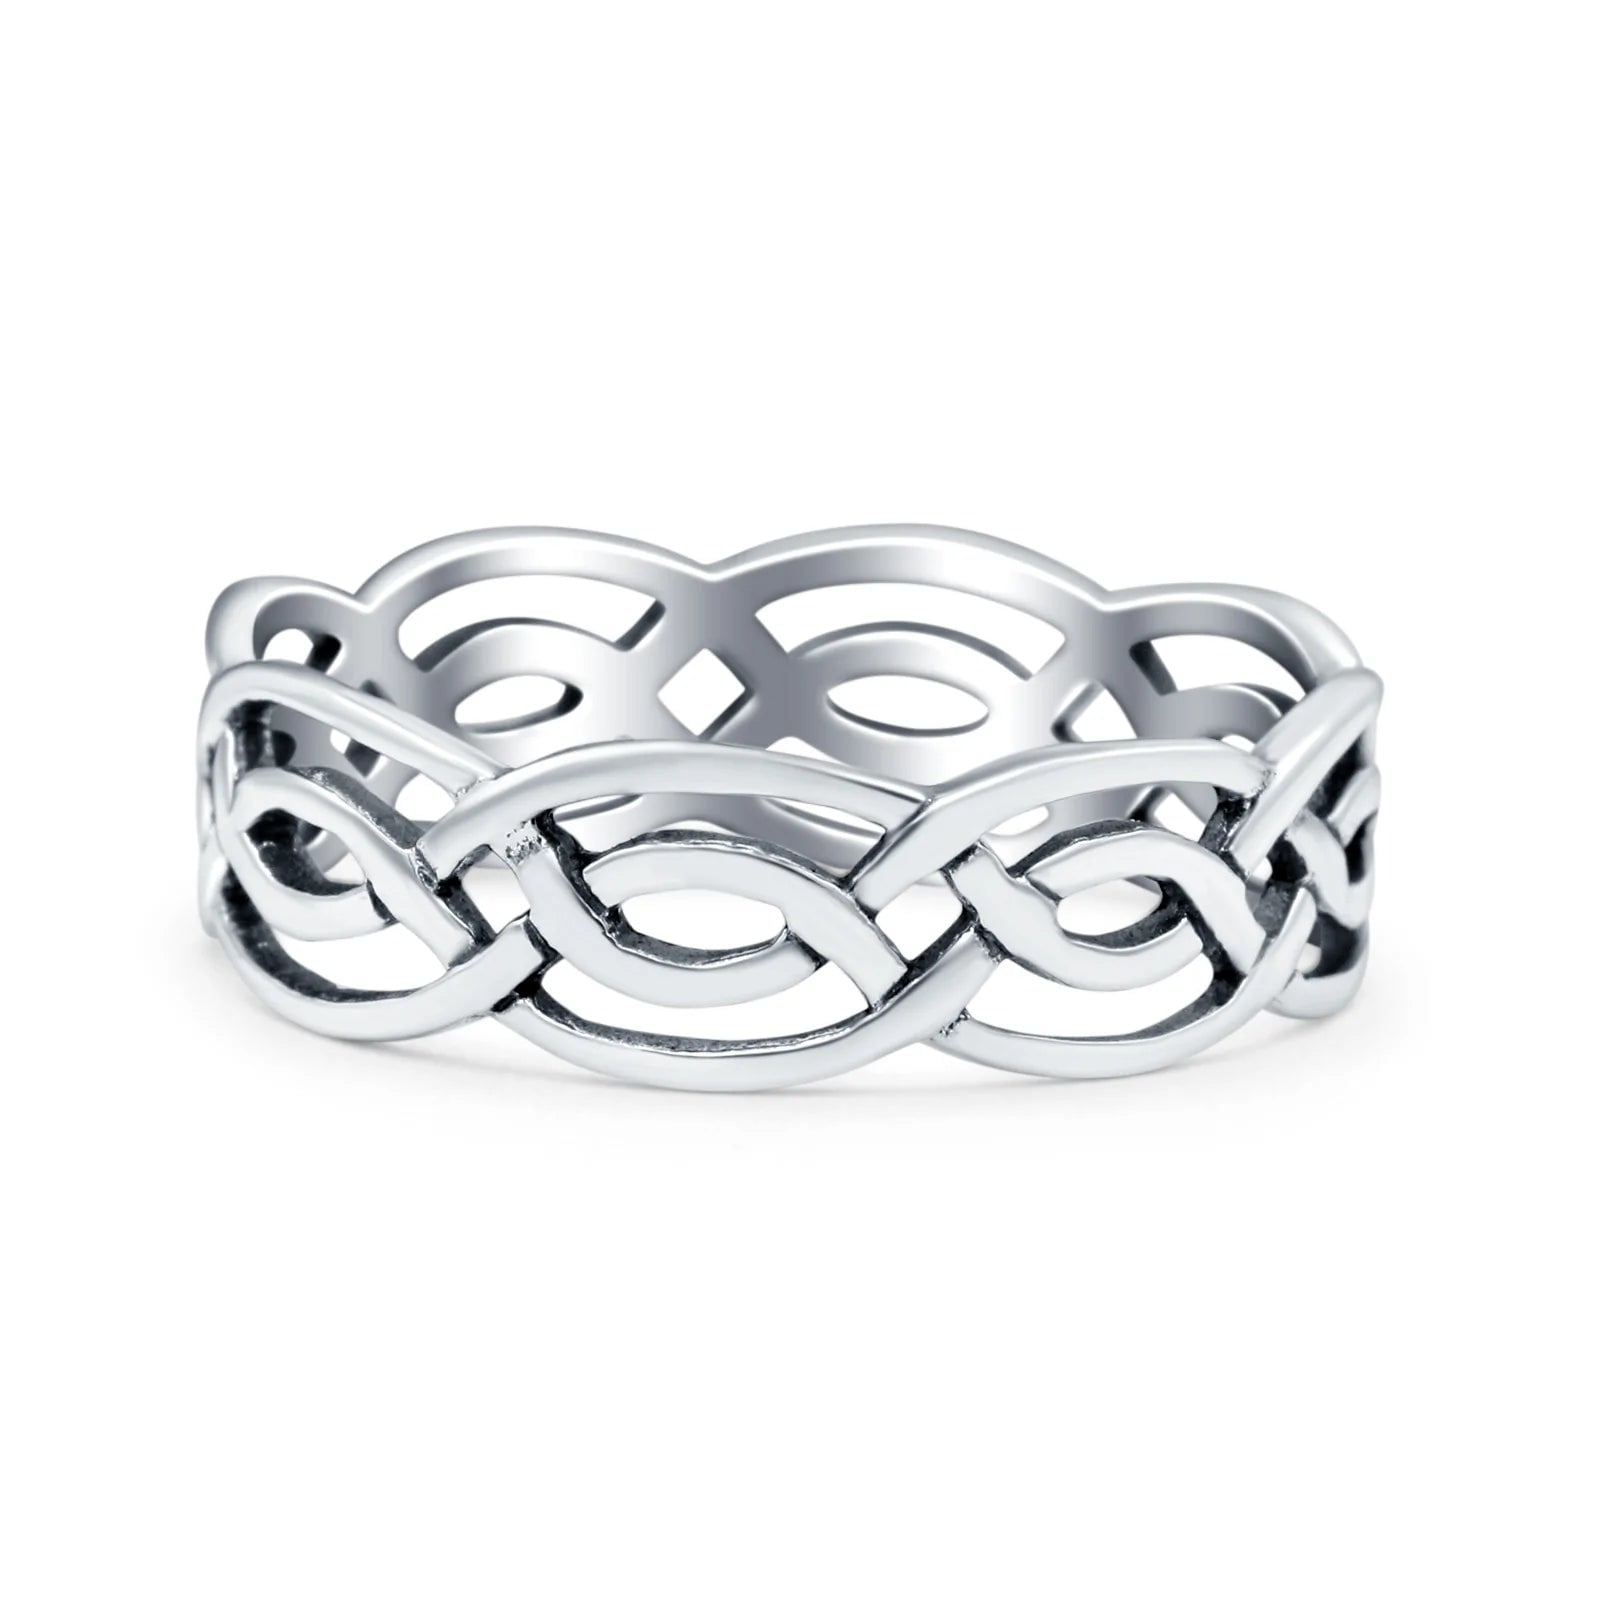 Blue Ring Sterling Oxidized 925 Co. Thumb Celtic Band Jewelry (5mm) Ring 9 Size Apple Solid Silver